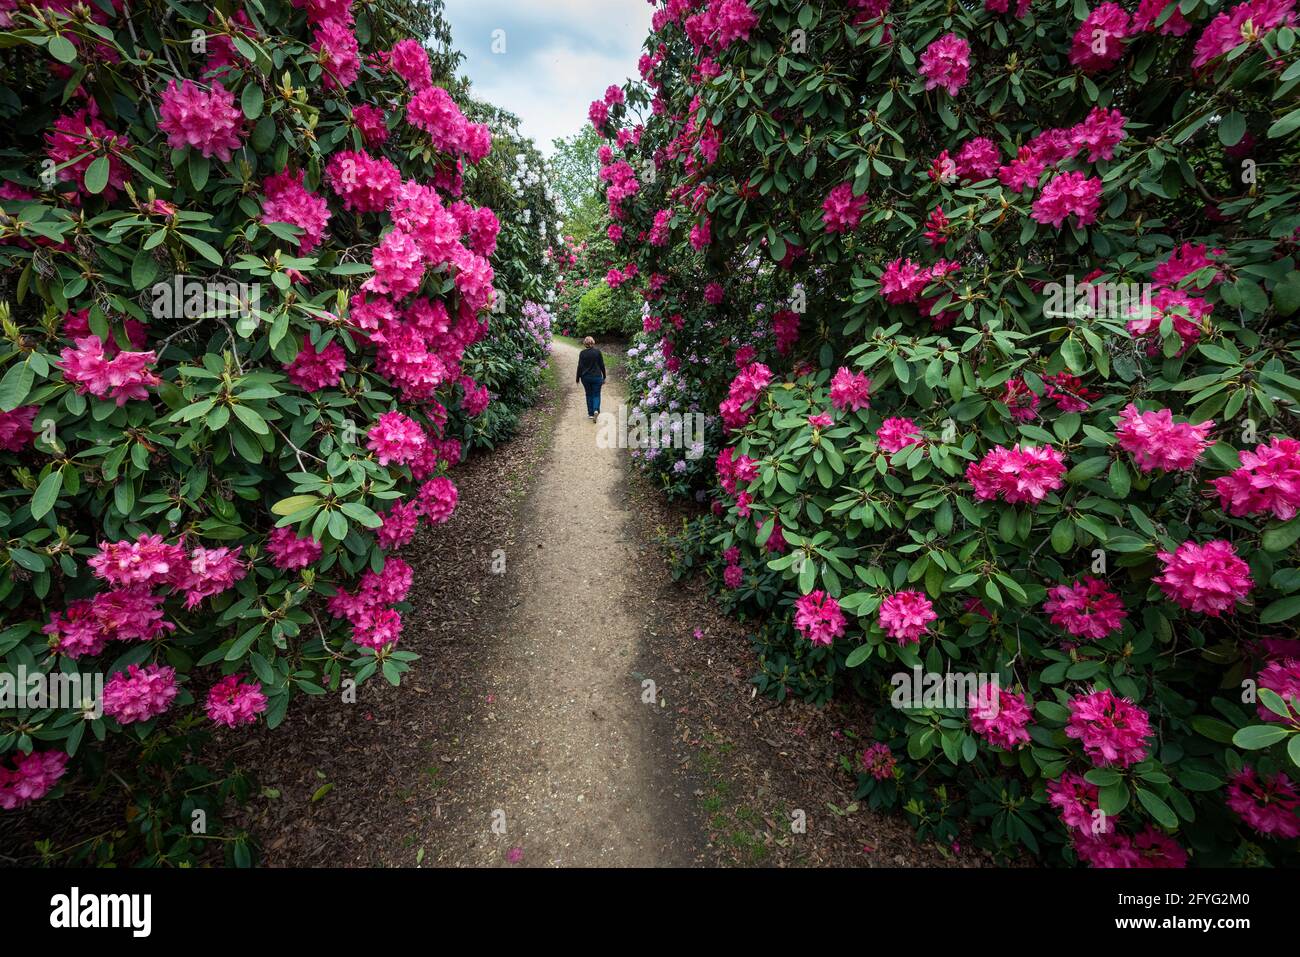 Iver, UK.  28 May 2021. UK Weather: A woman walks amongst the rhododendrons and azalea, currently in bloom, in the Temple Gardens at Langley Park in Iver, Buckinghamshire ahead of the Bank Holiday weekend, when temperatures are expected to rise above 20C.  Langley Park is a former royal hunting ground with links back to King Henry VIII, Queen Elizabeth I and Queen Victoria.   Credit: Stephen Chung / Alamy Live News Stock Photo